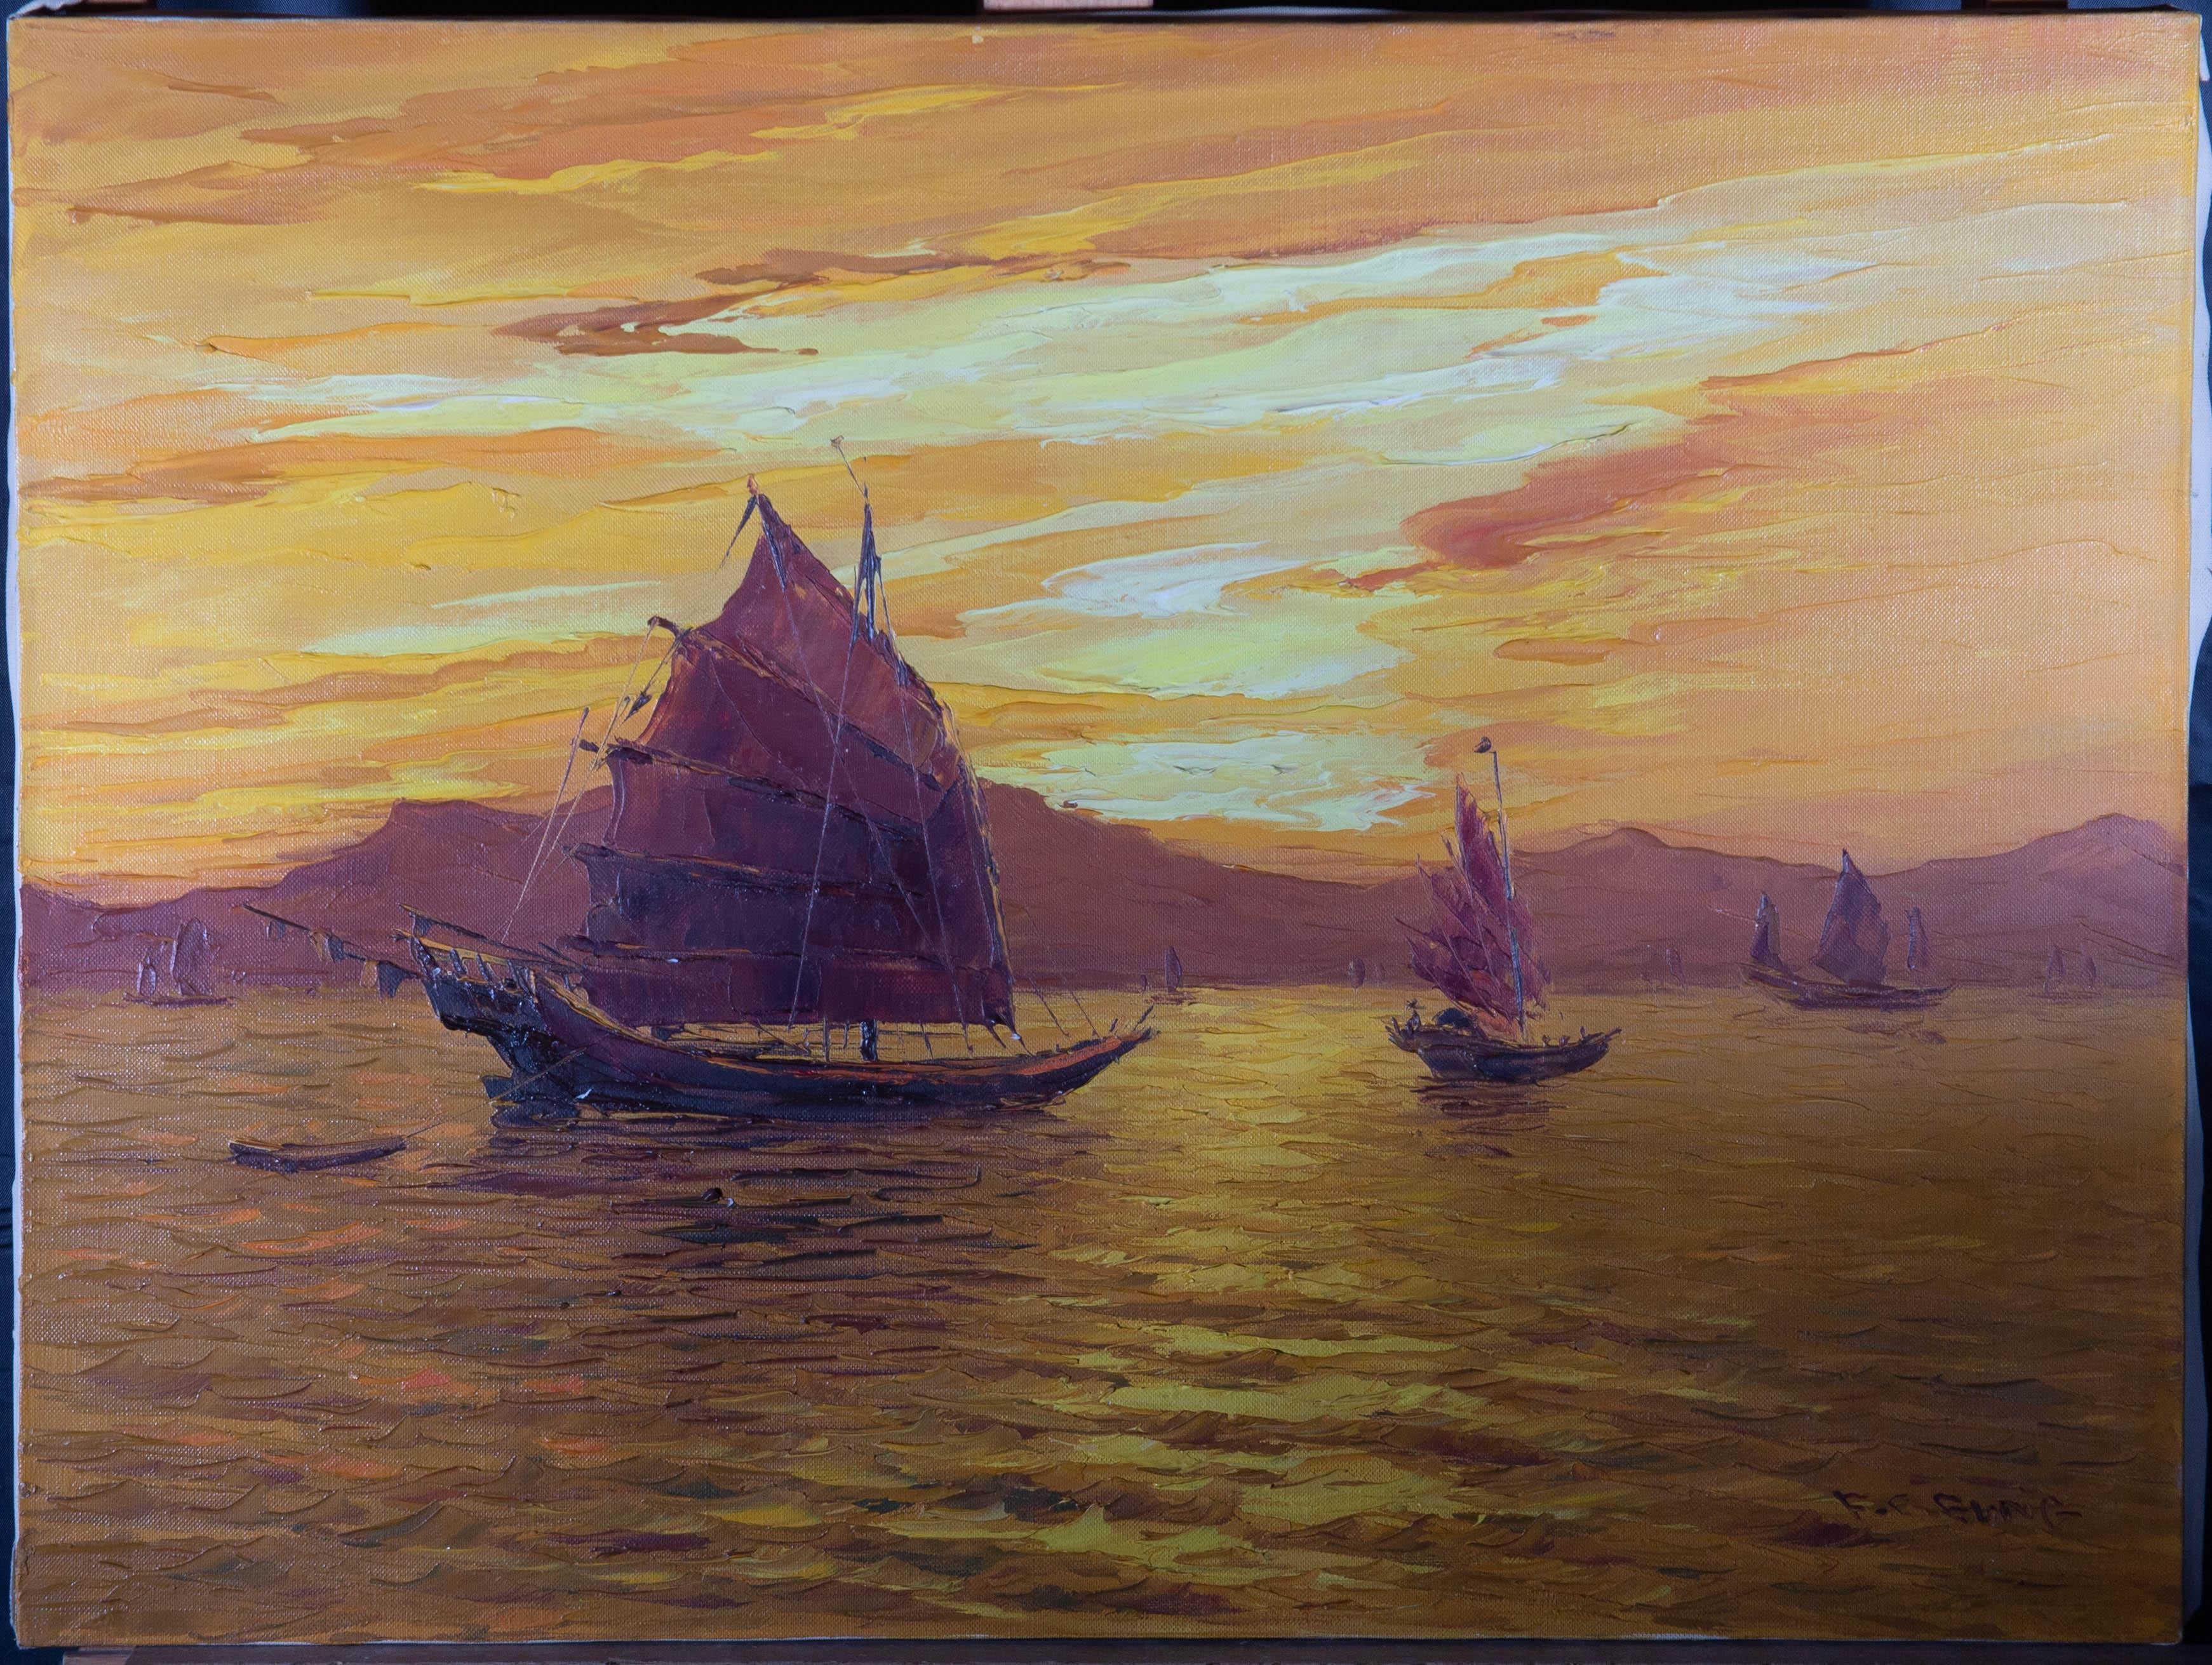 A vibrant and striking impasto seascape, showing Chinese junk ships illuminated by a vivid orange sunset. The artist has signed to the lower right corner. On canvas.
